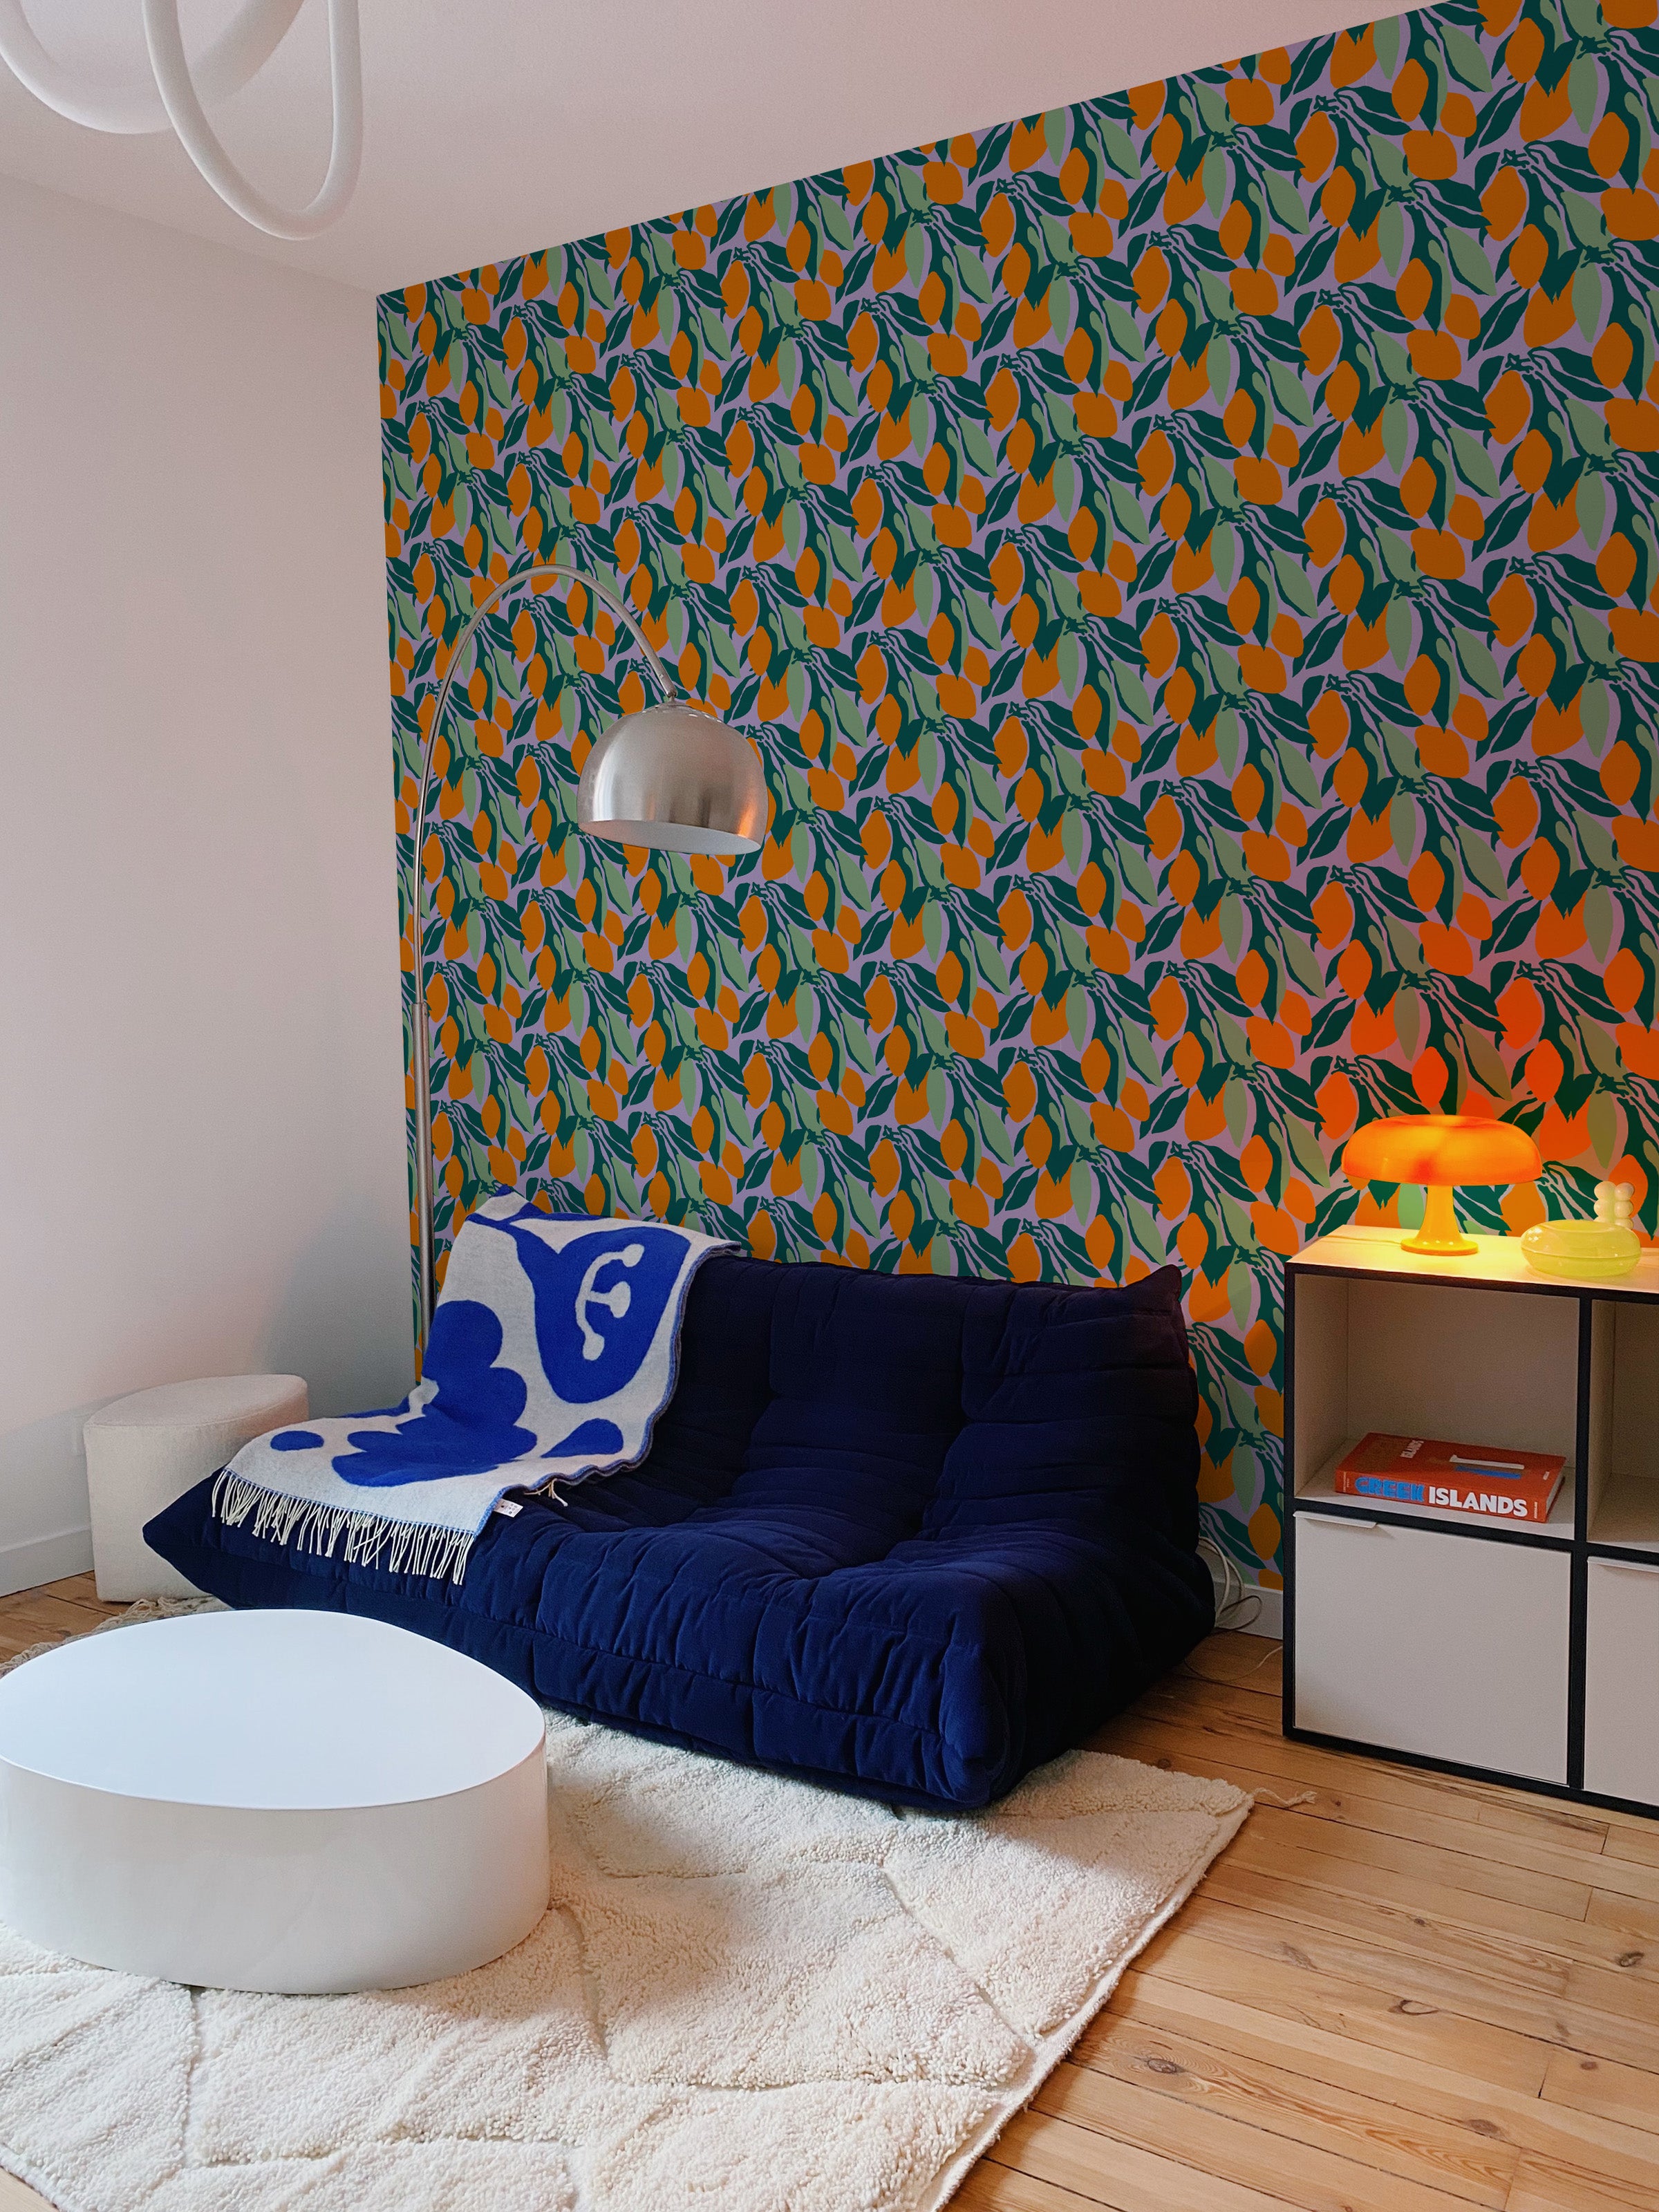 A modern living room featuring a wall covered in wallpaper with a pattern of orange fruits and green leaves on a purple background. The room includes a navy blue sofa, a round white coffee table, and various modern decorations, creating a vibrant and stylish space